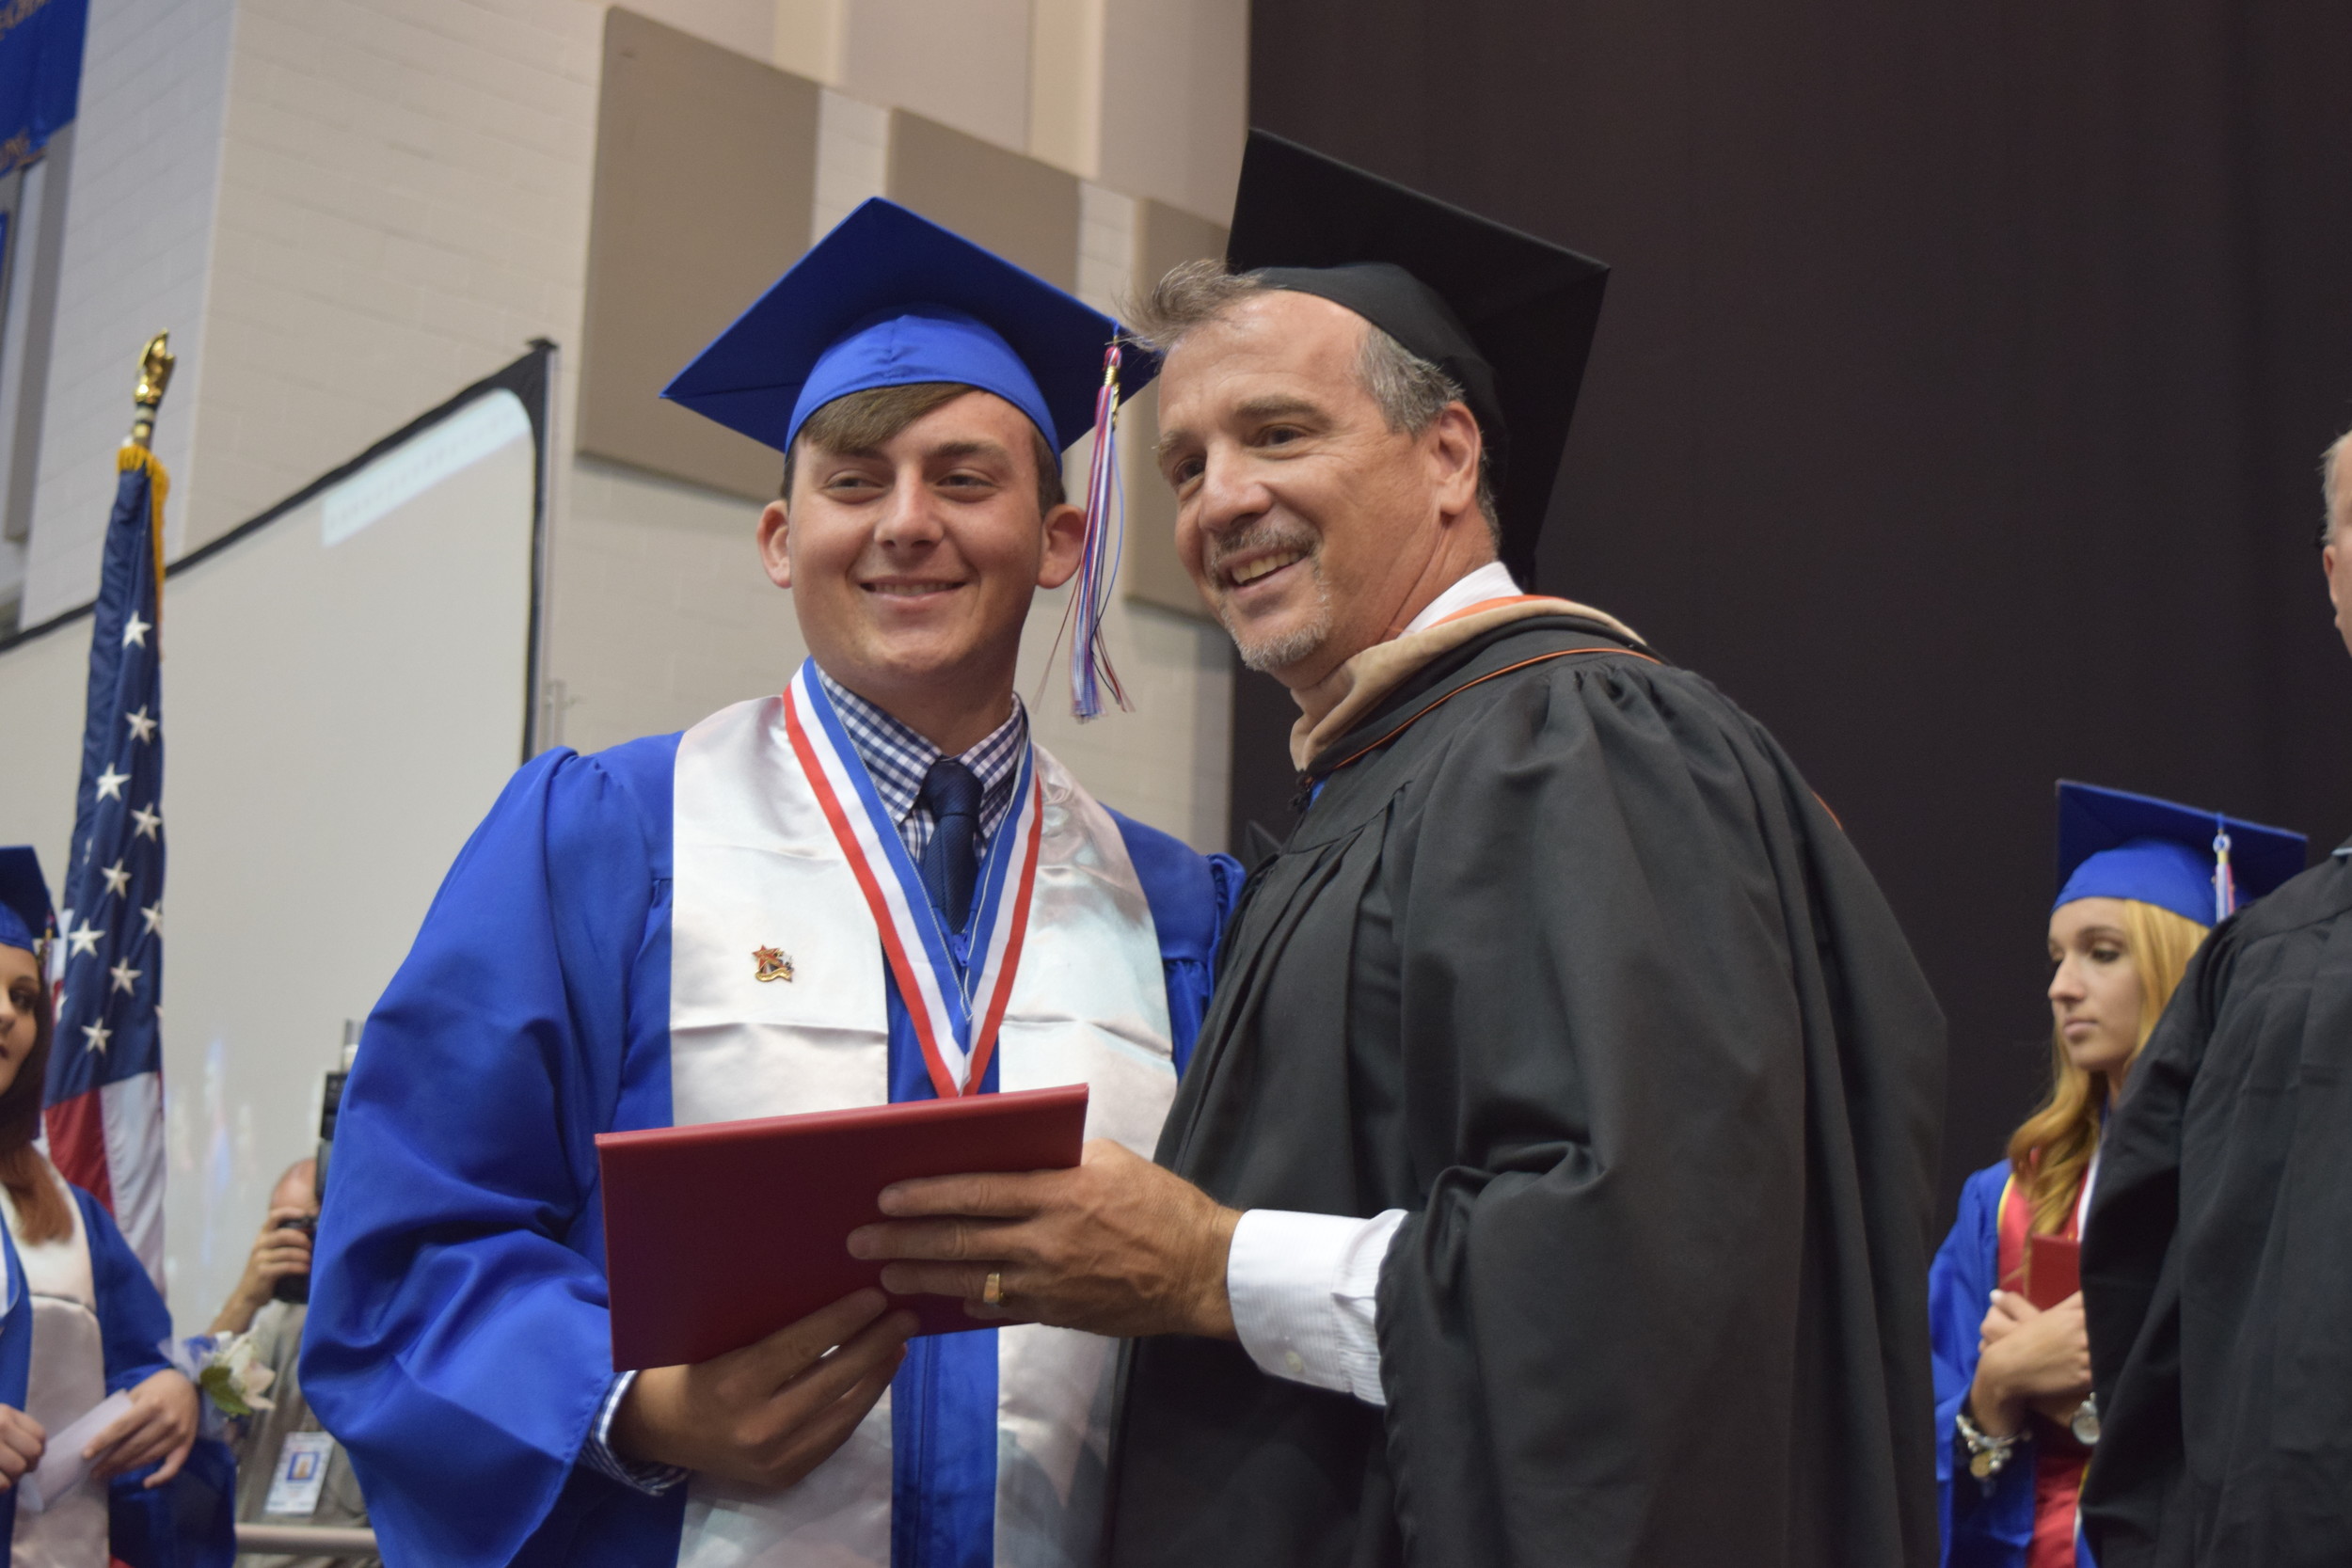 Board of Education Trustee Michael Pappas presented Justin Norcini with his diploma.